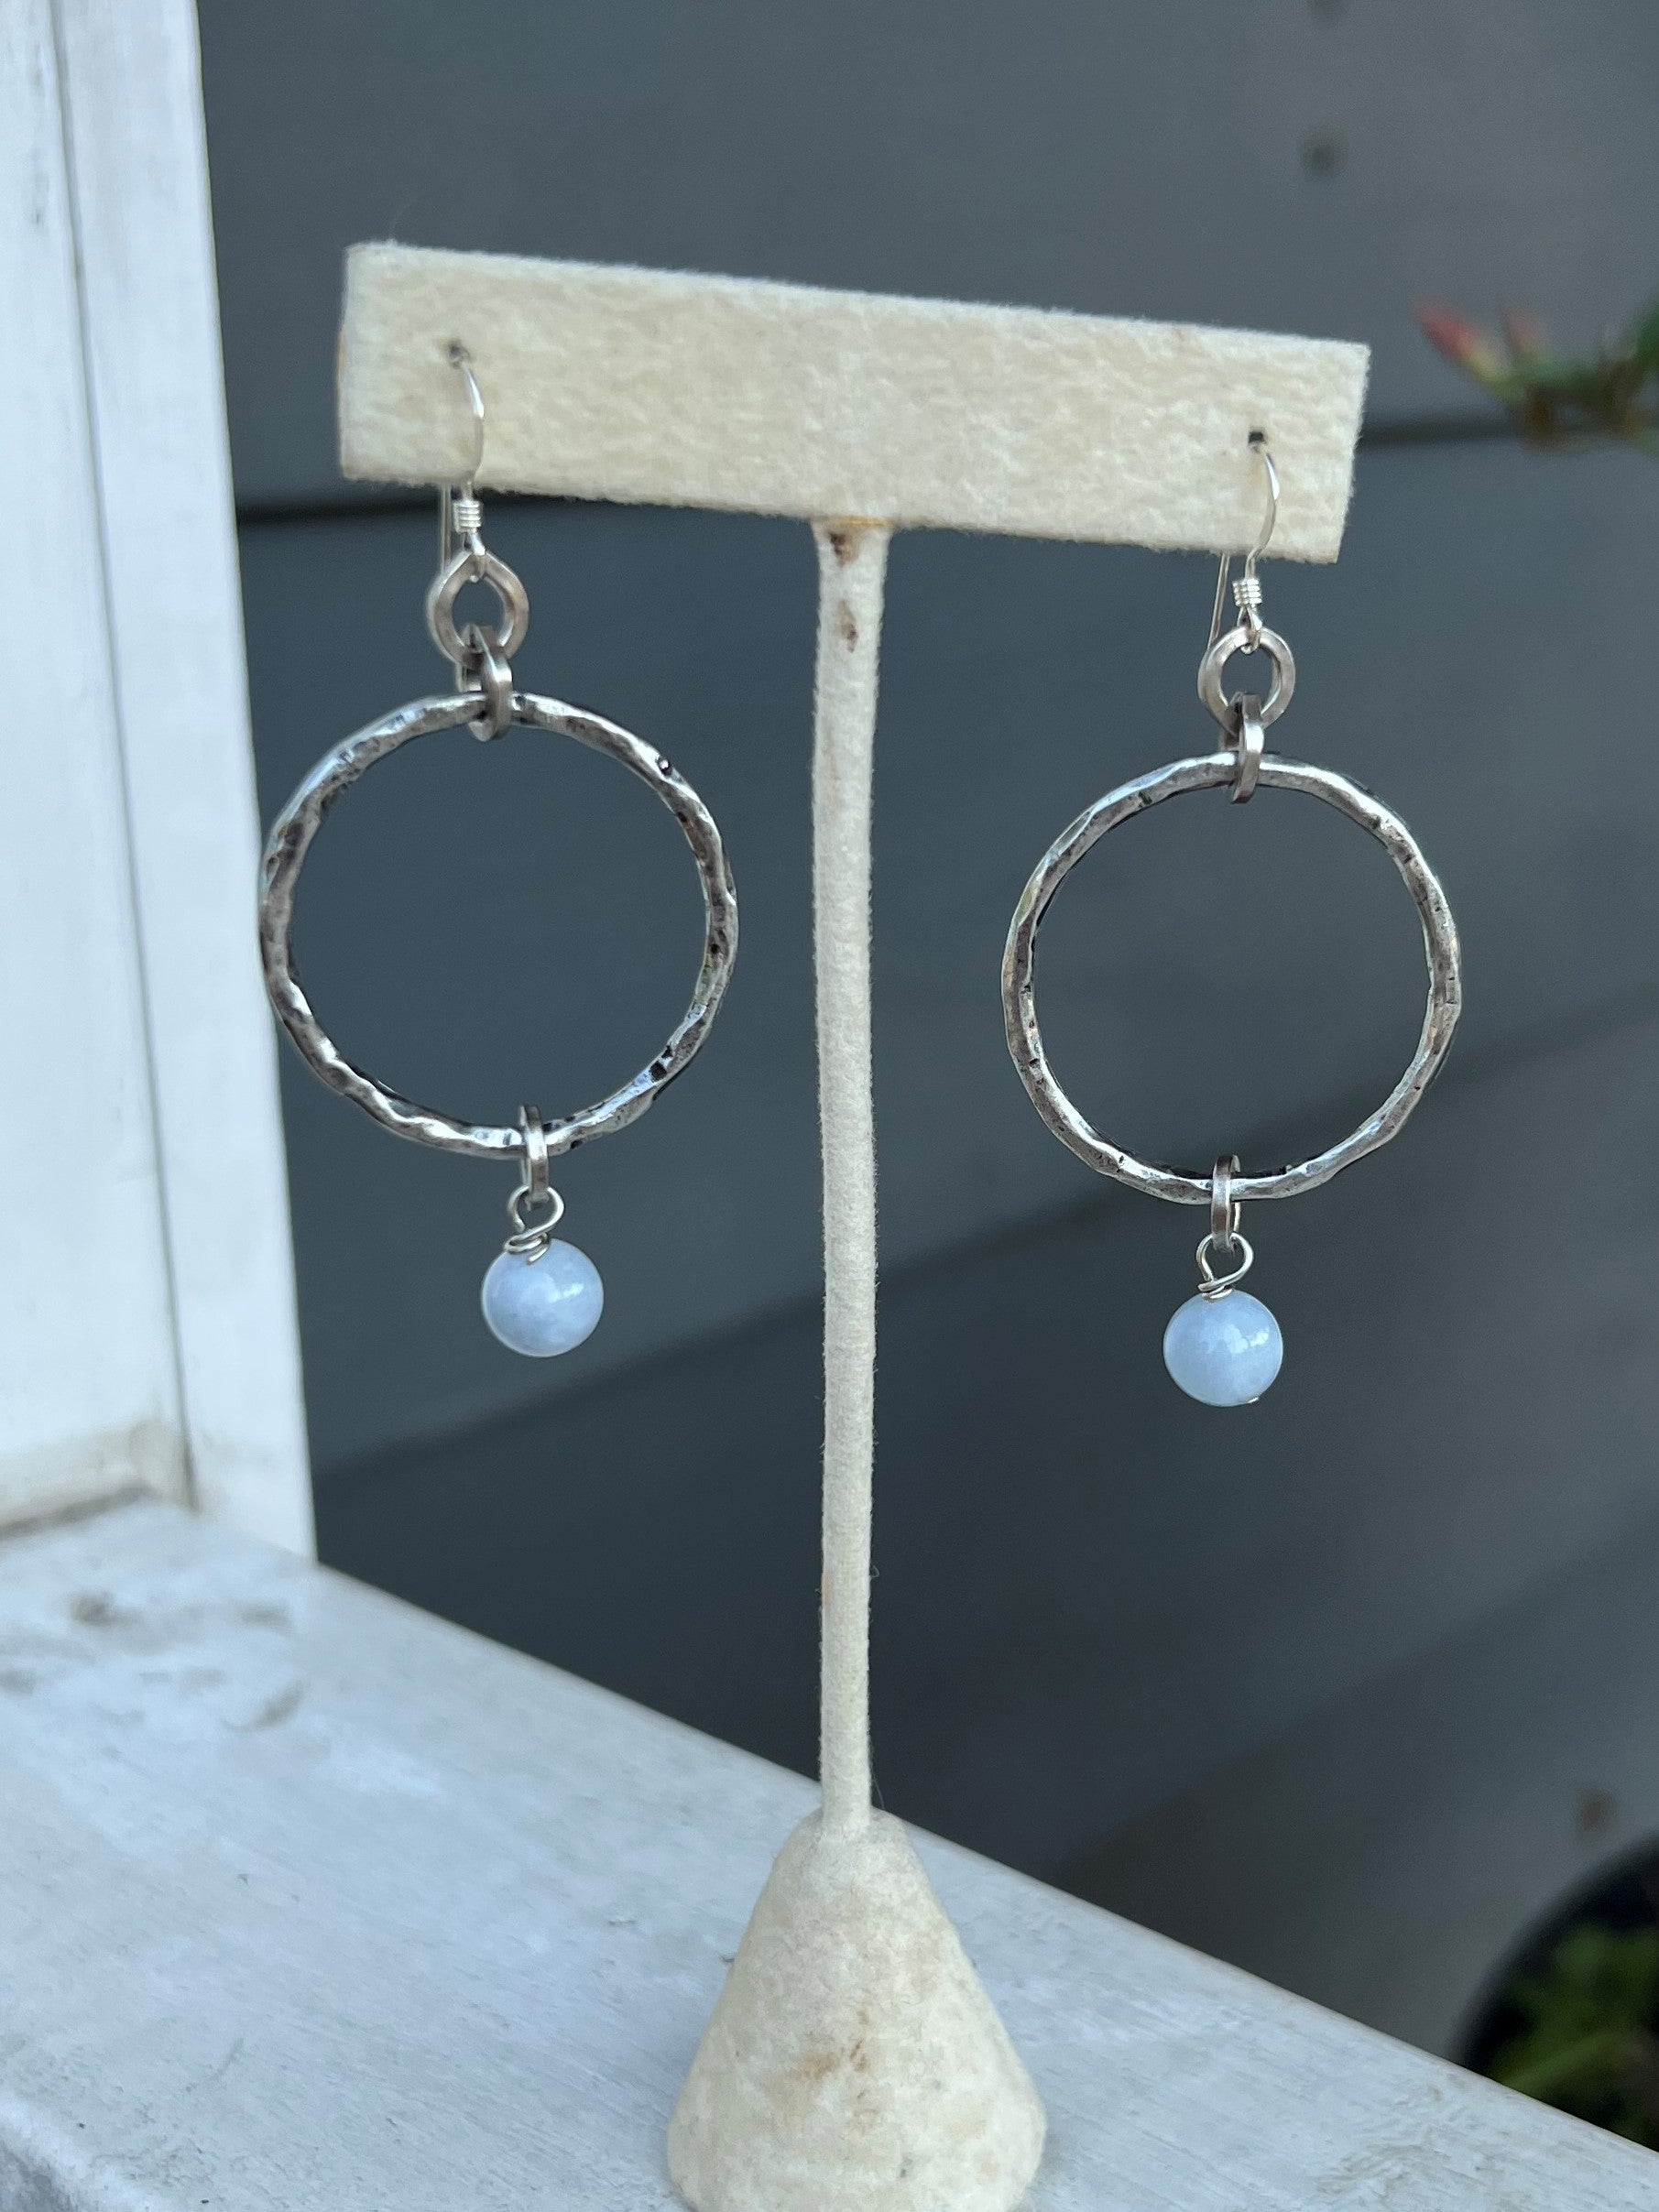 Earrings with Circle and Bead Charm